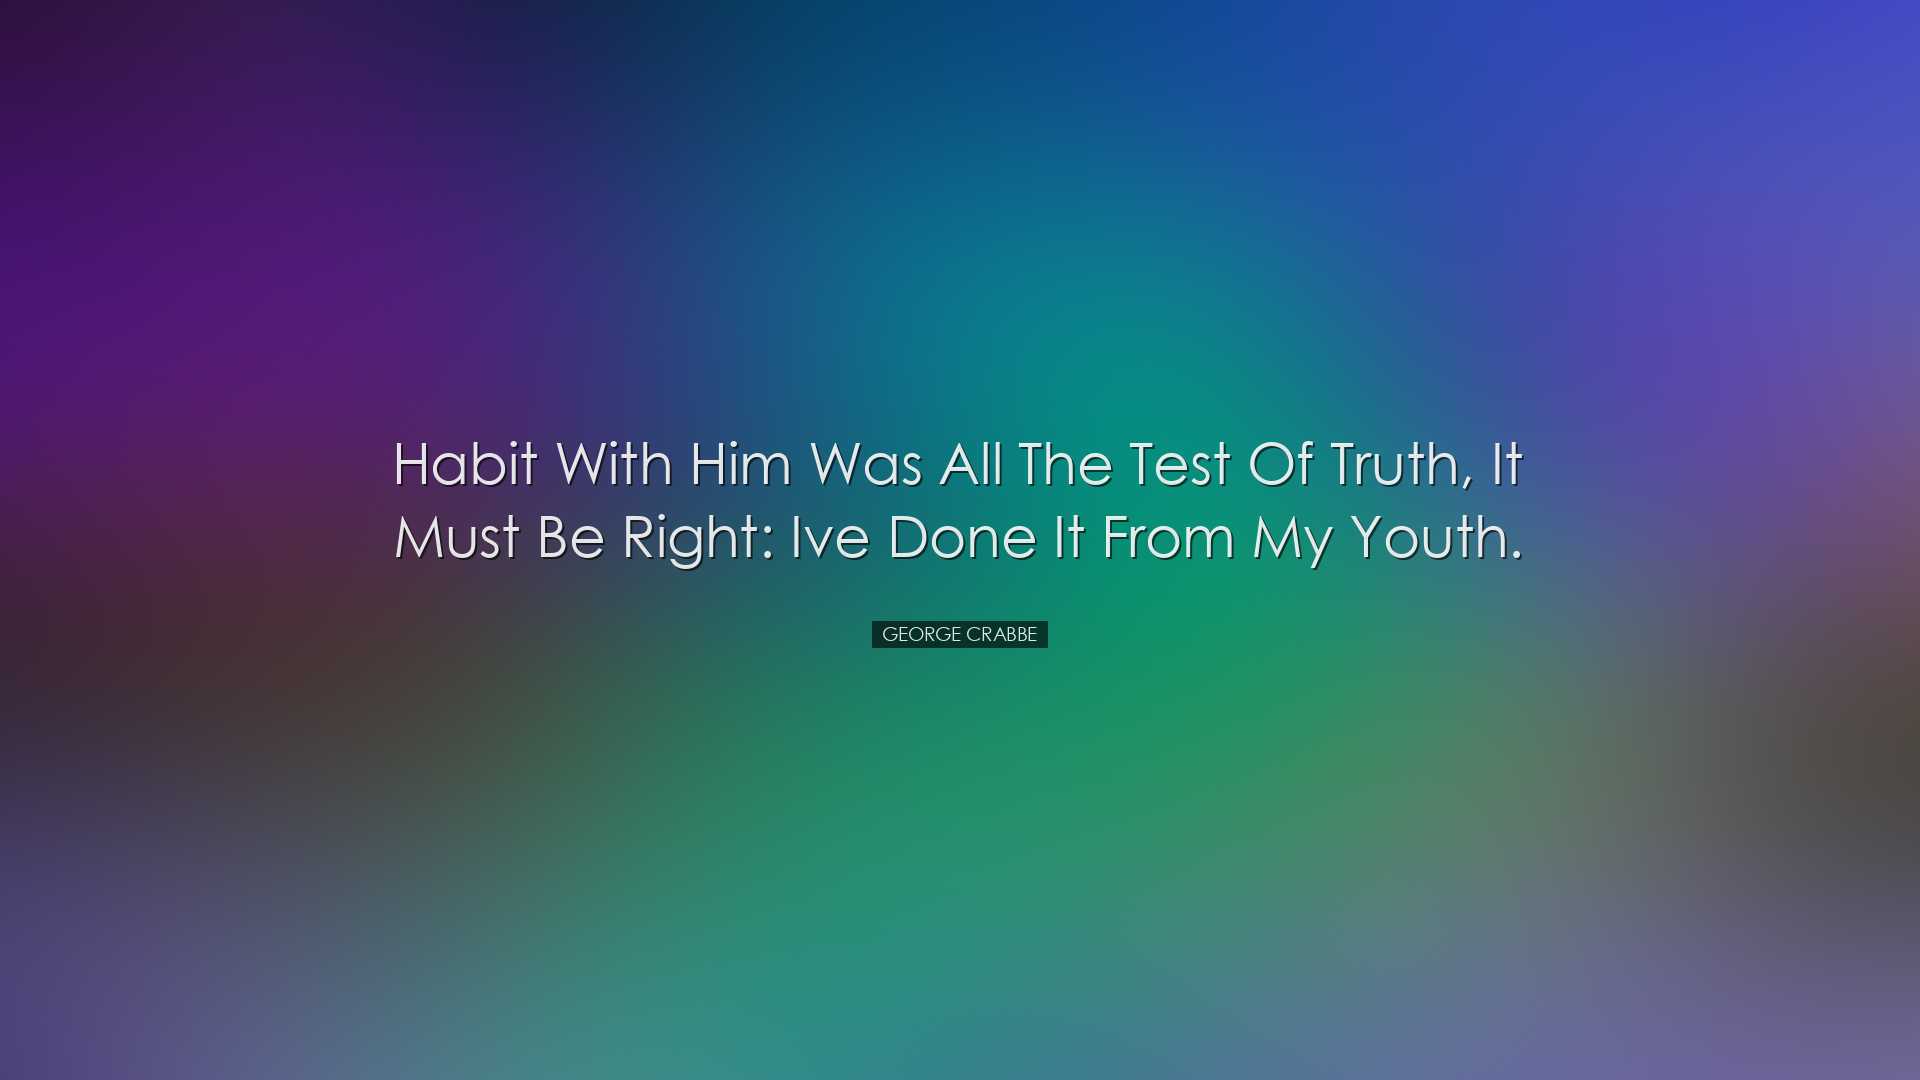 Habit with him was all the test of truth, it must be right: Ive do